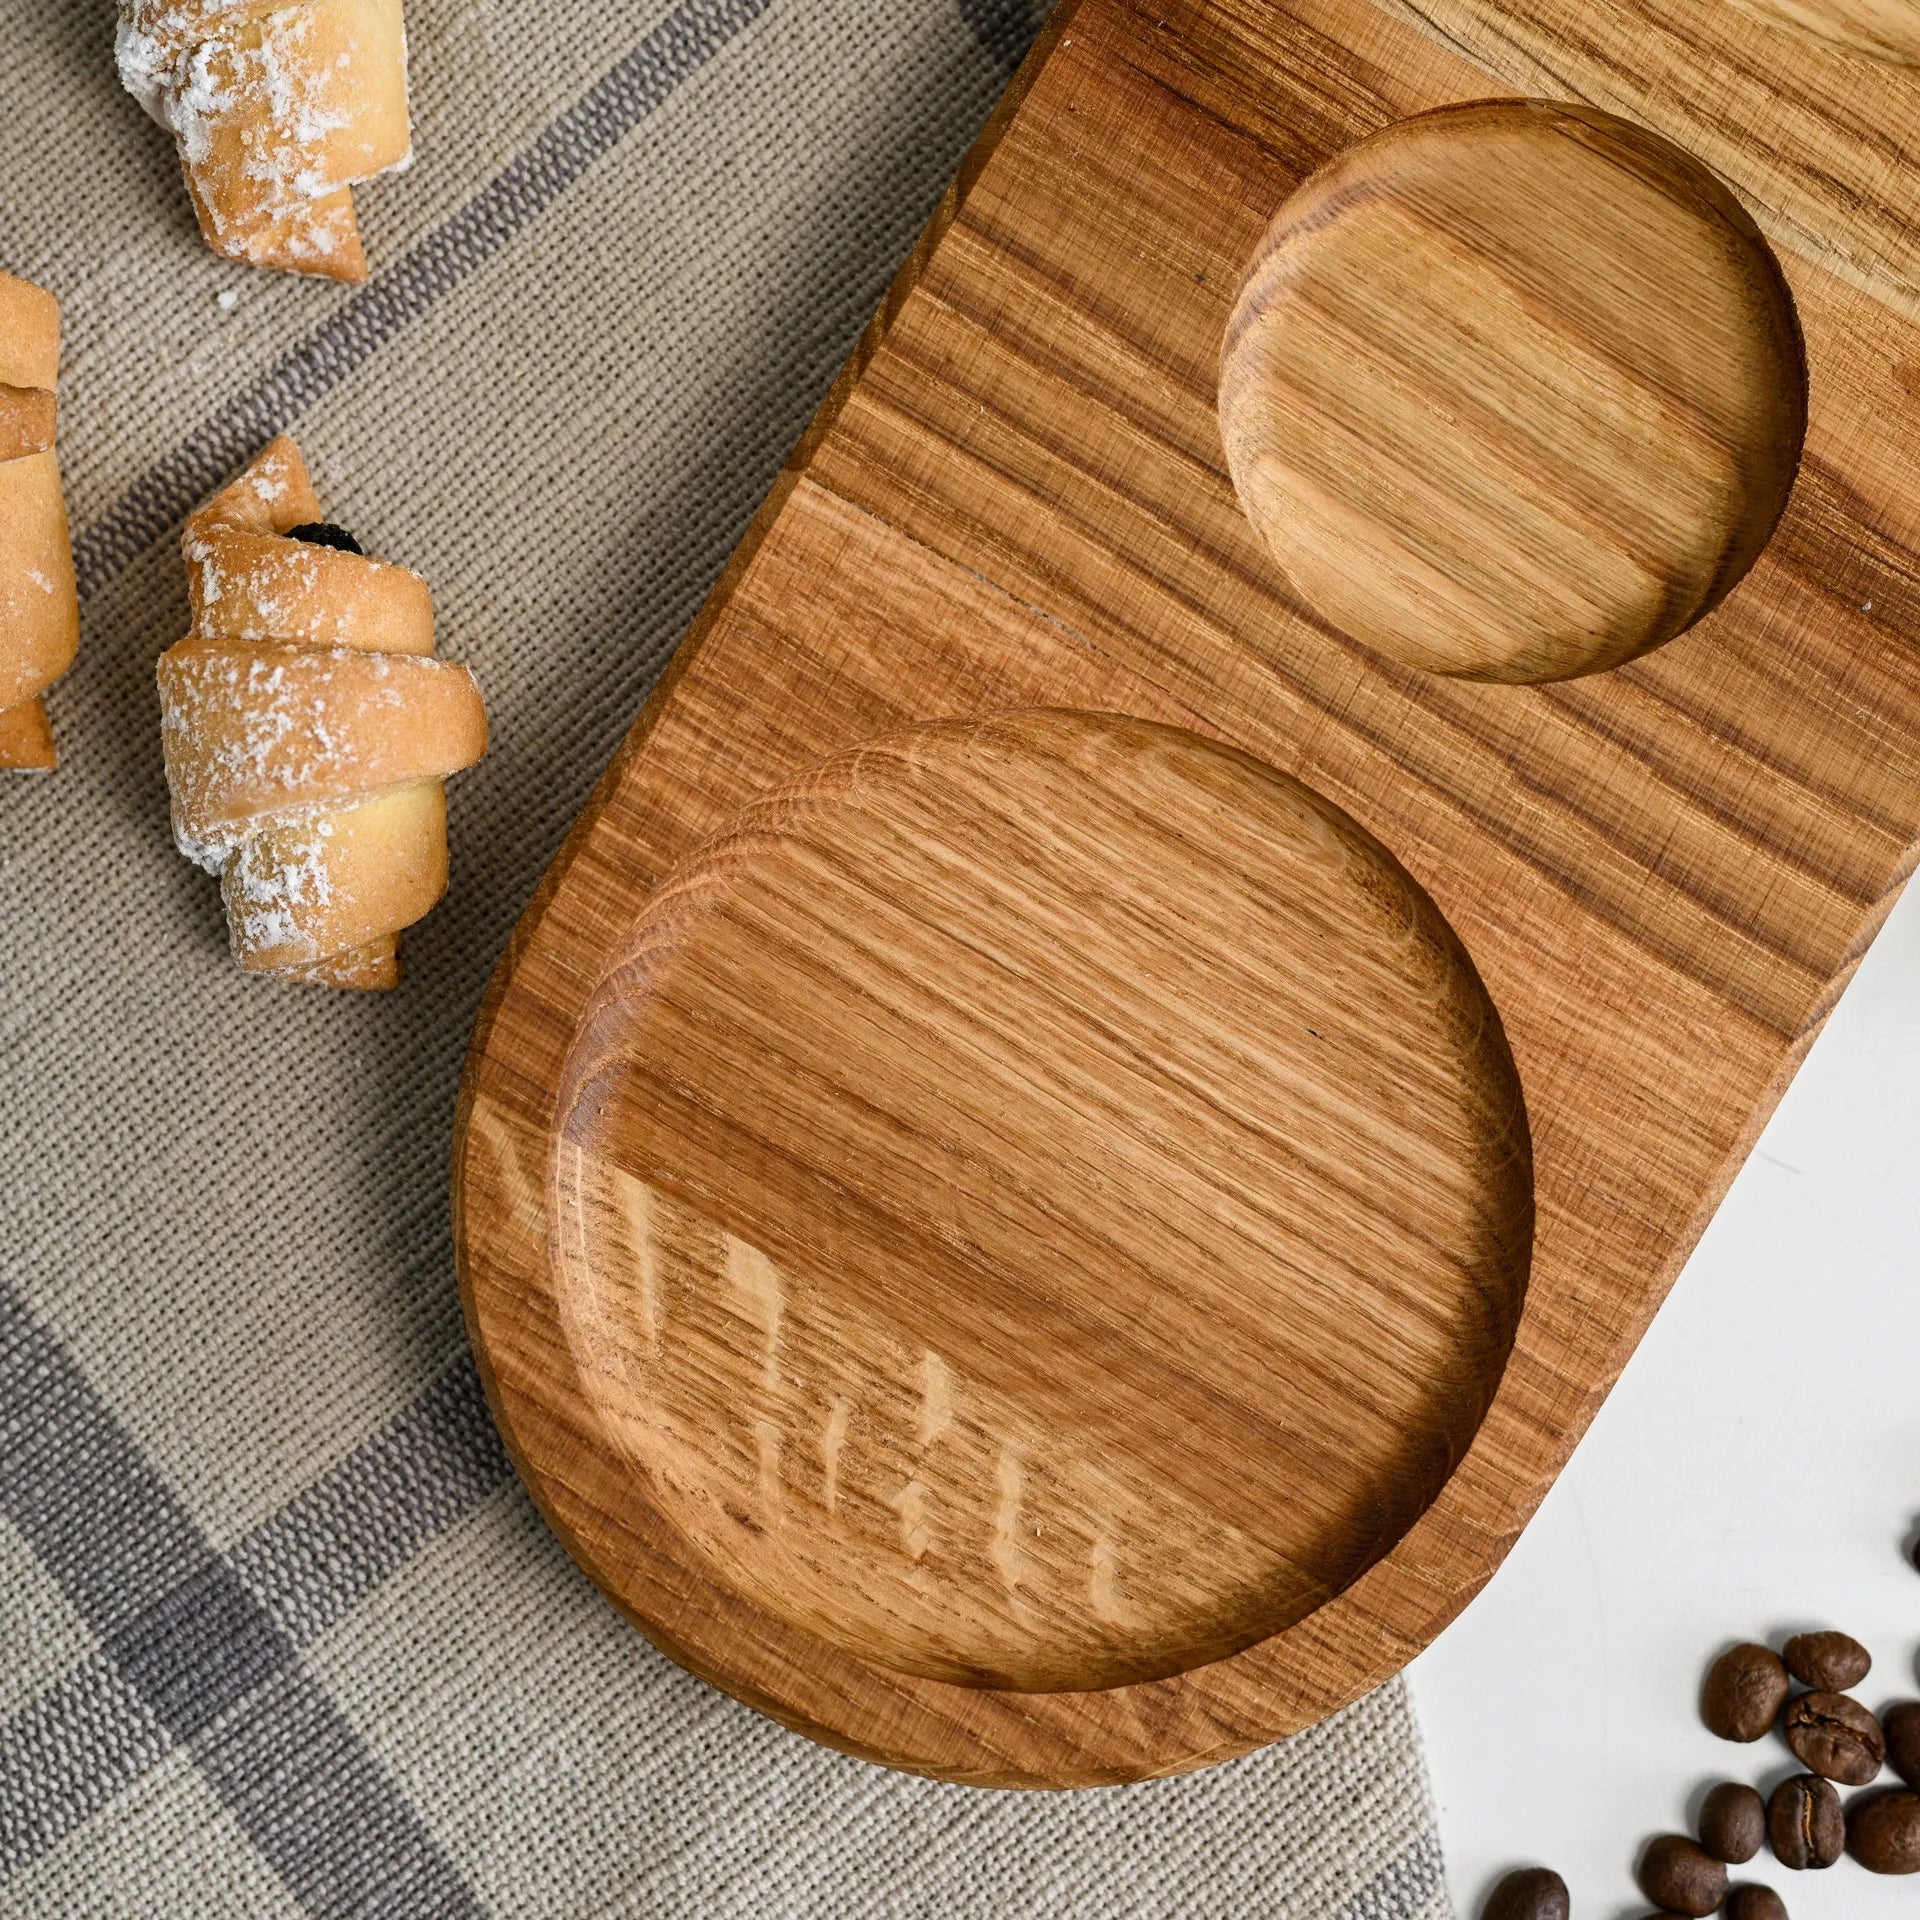 Wooden serving board, versatile and stylish, perfect for cafes, restaurants, and home kitchens.